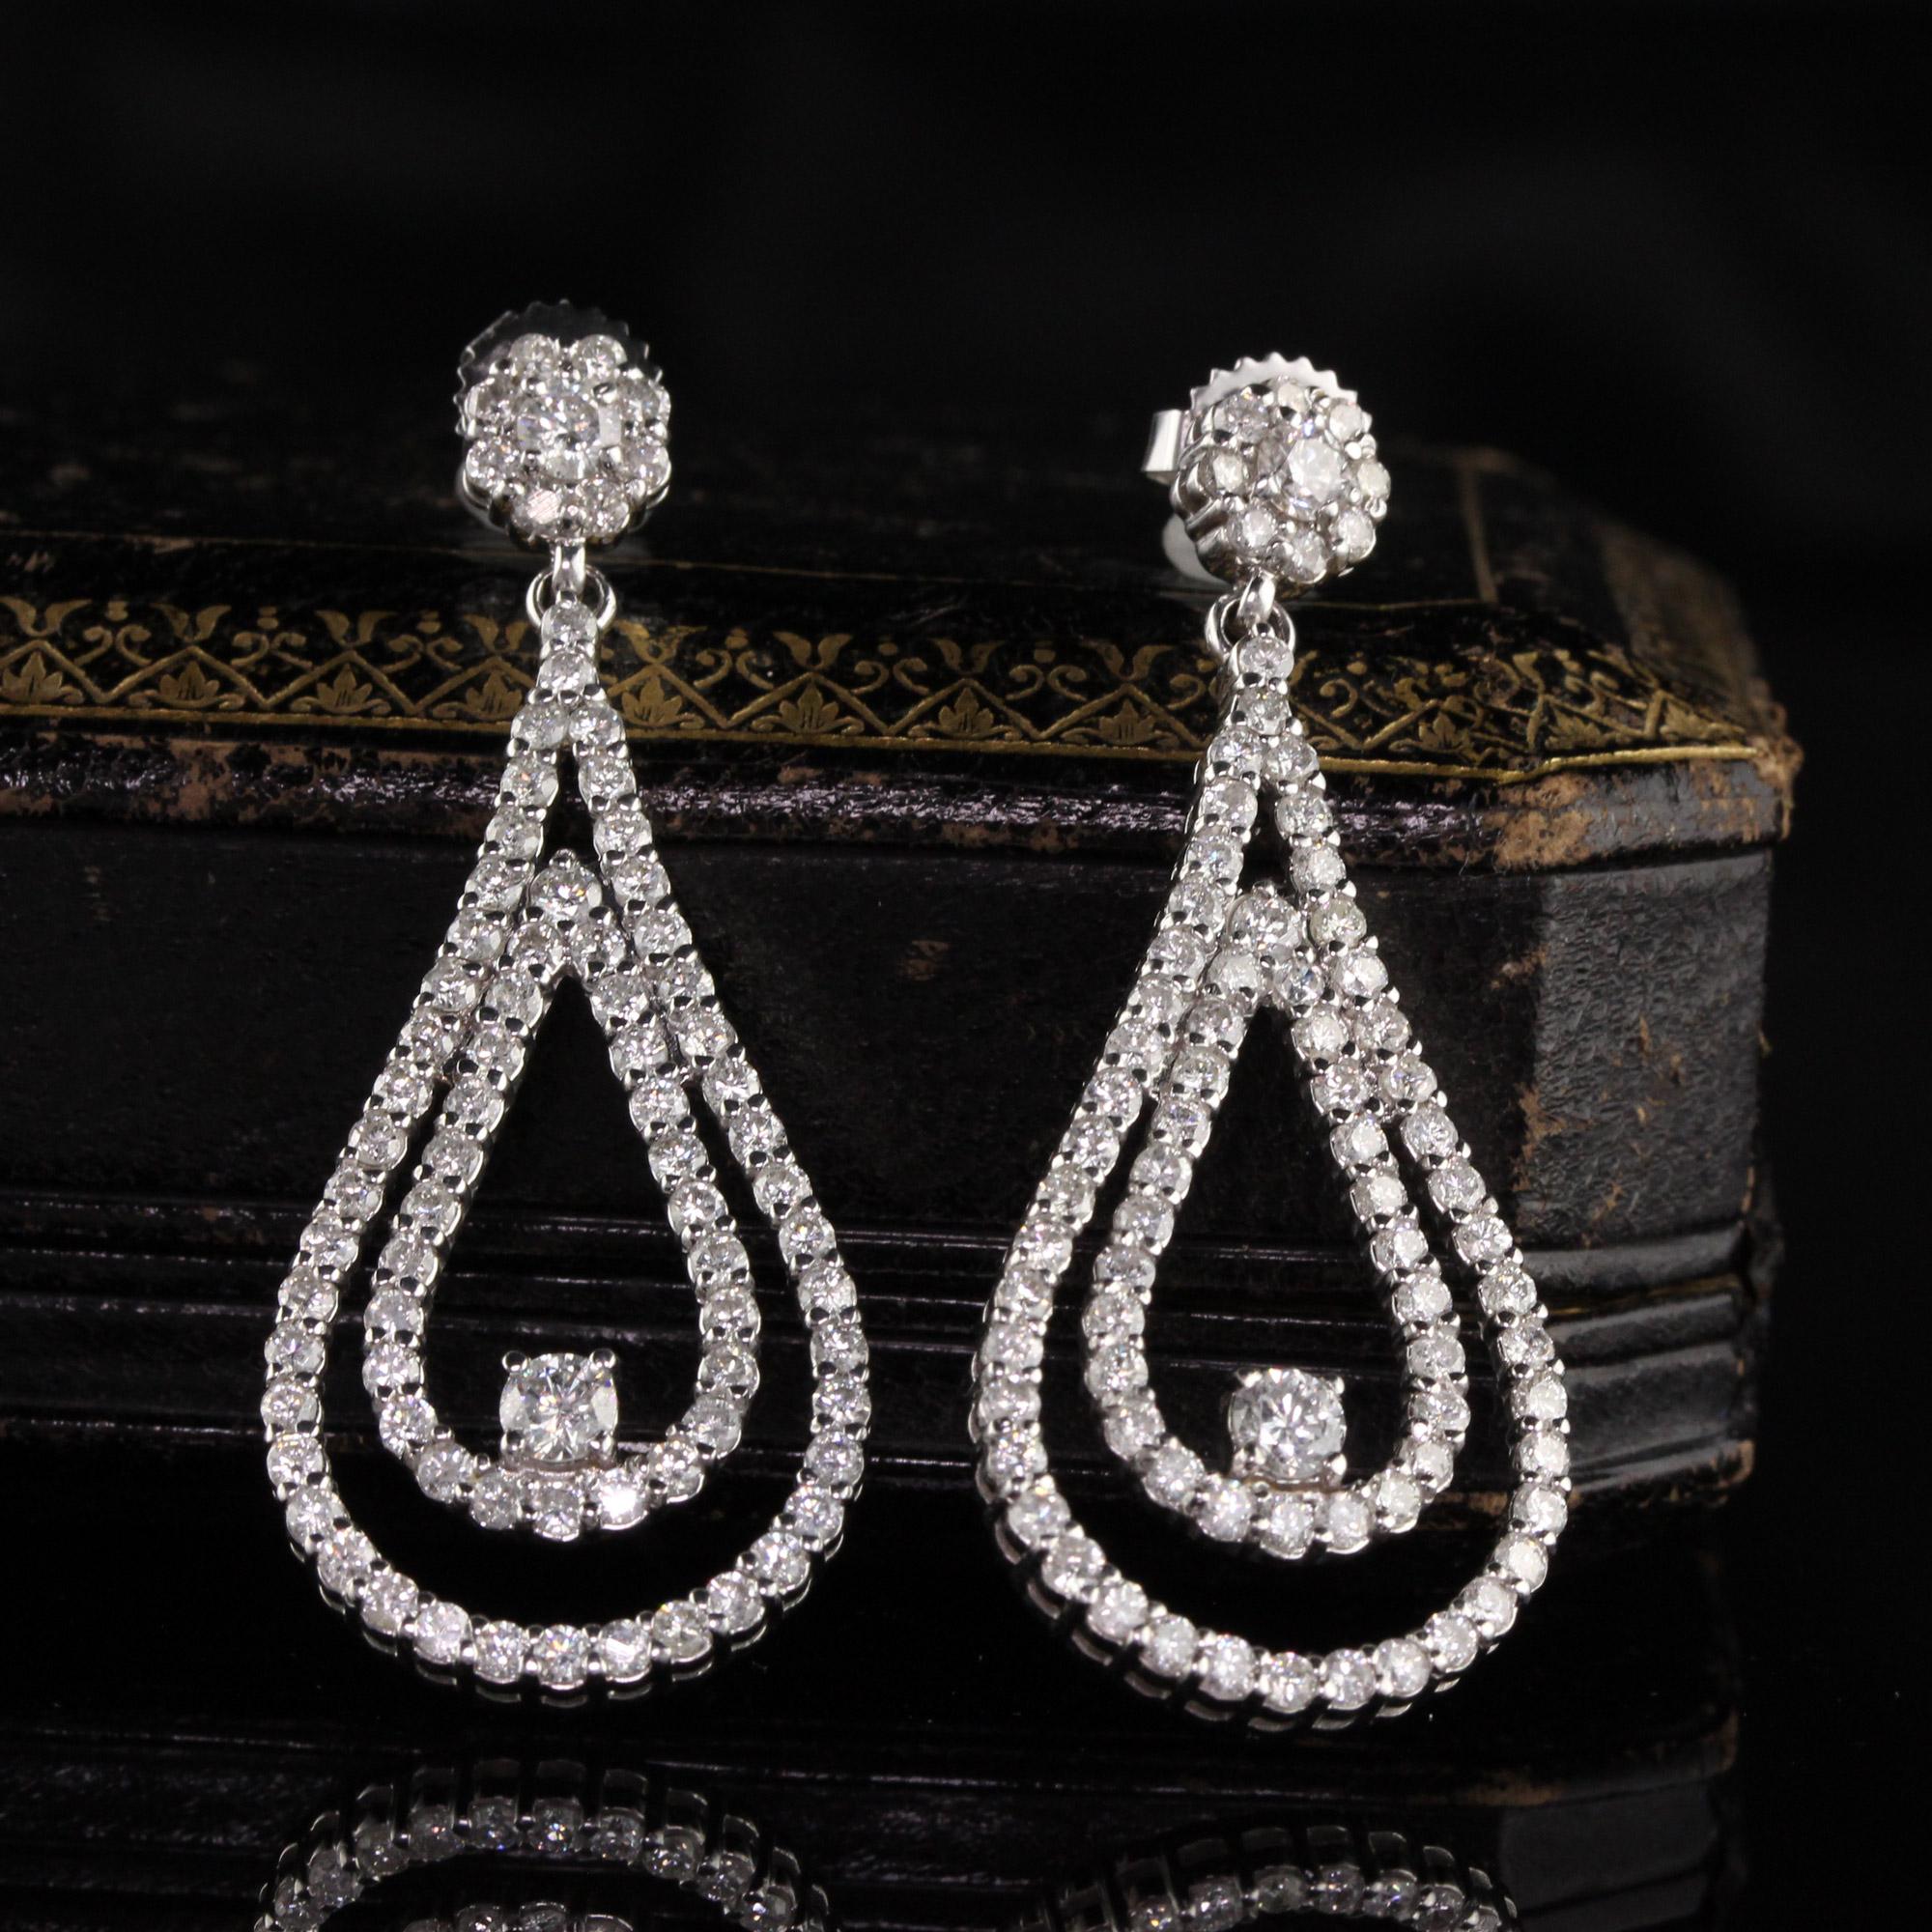 Stunning and elegant diamond drop earrings.

Metal: 14K White Gold

Weight: 9.9 Grams

Diamond Weight: Approx. 4 ct

Diamond Color: H

Diamond Clarity: SI1

Measurements: 44.85 x 18.74 mm